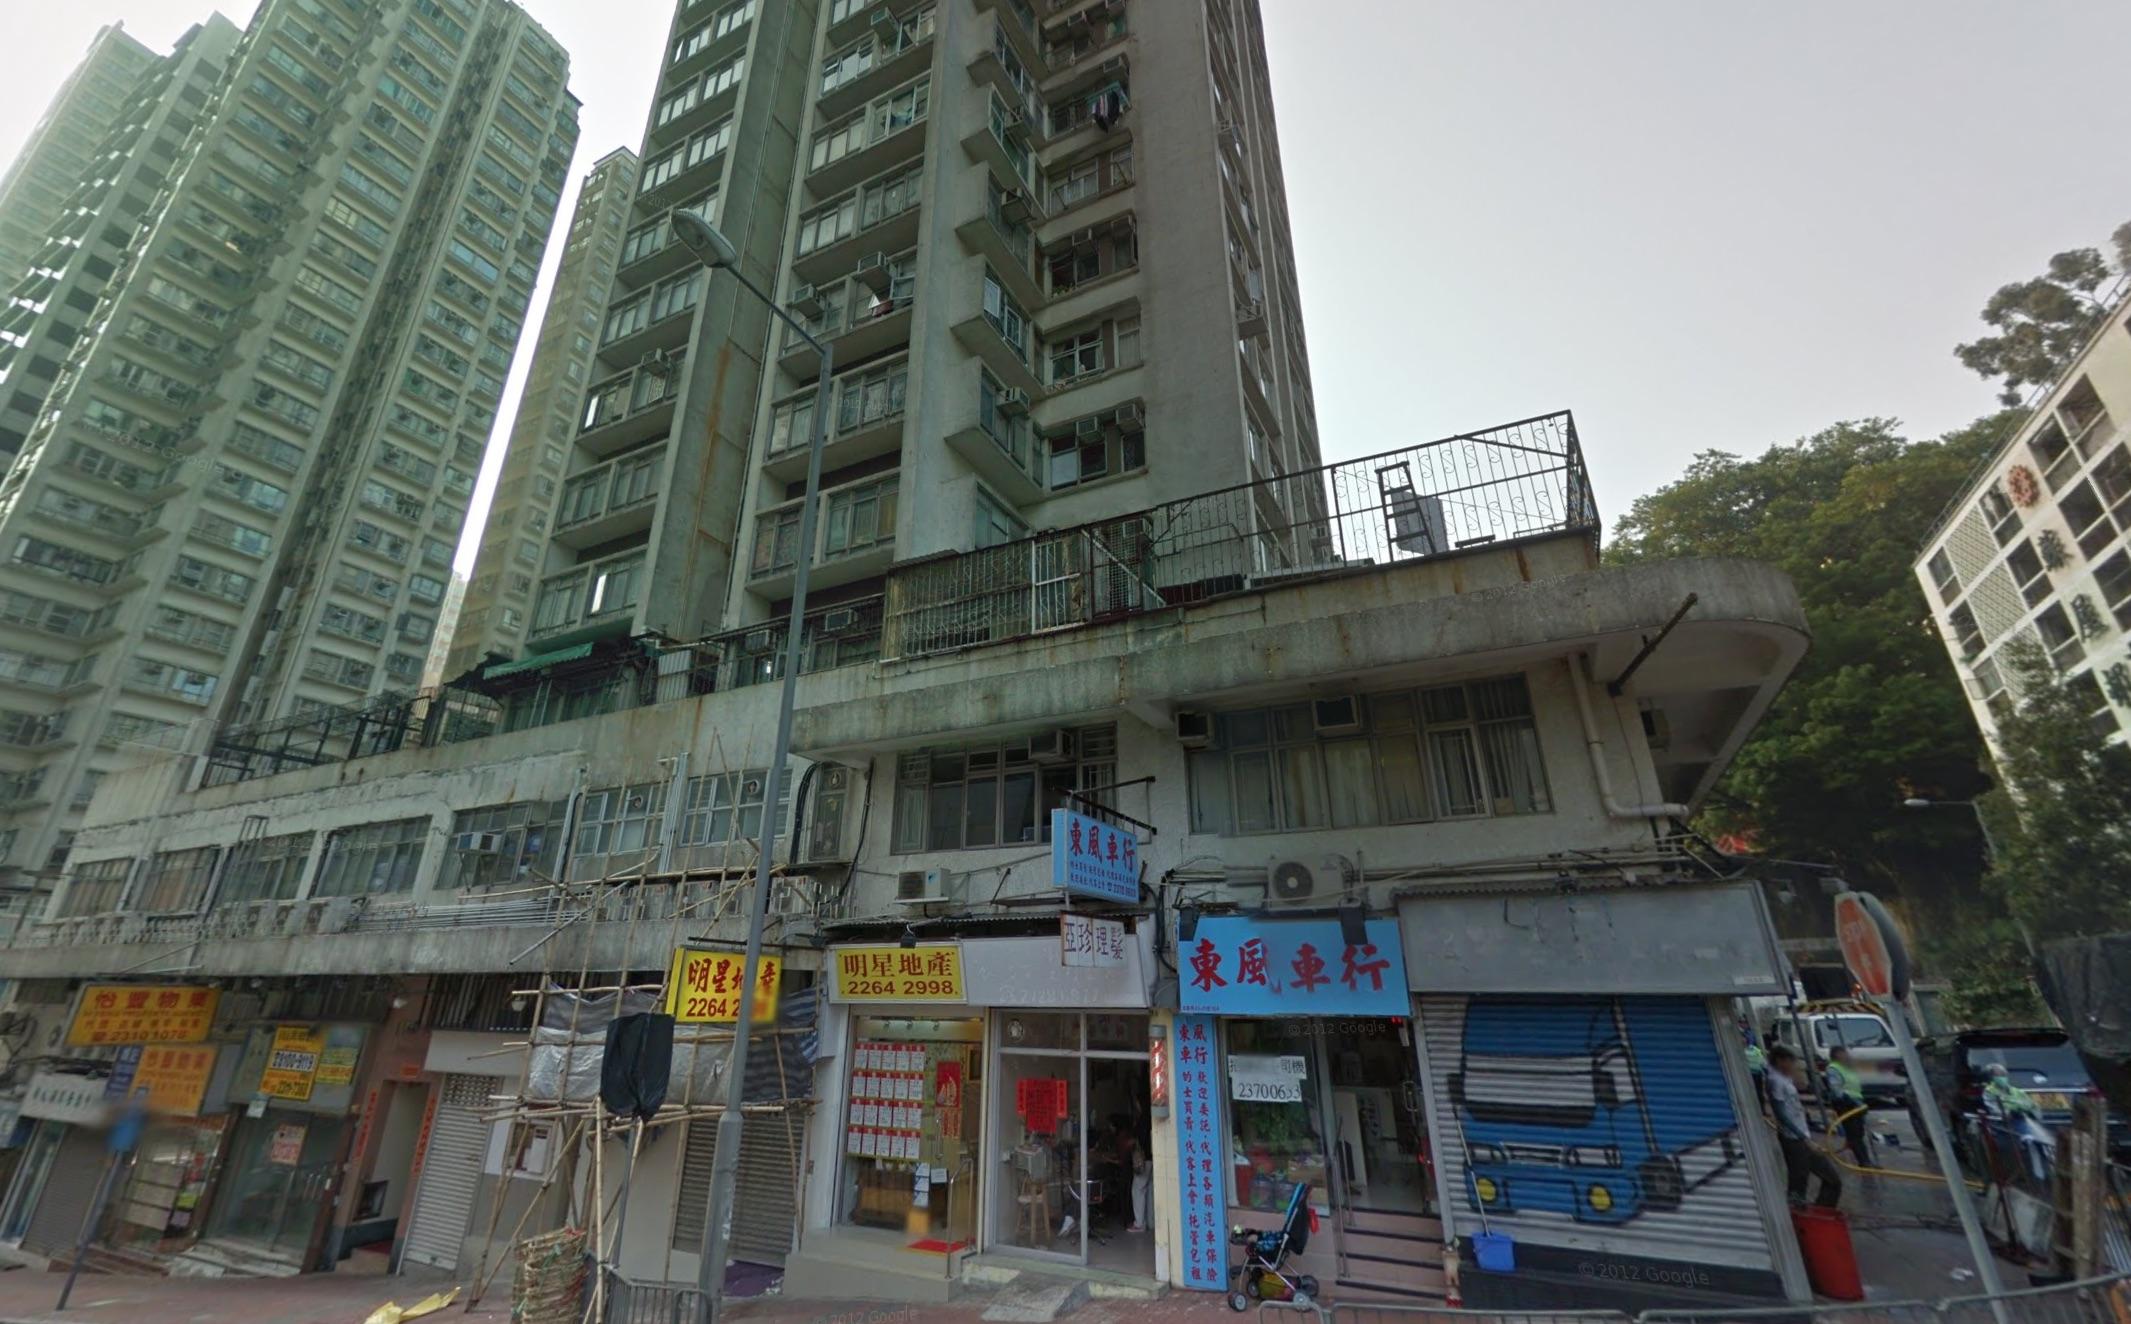 Building in Cheung Sha Wan from which the dog was thrown. Via Google